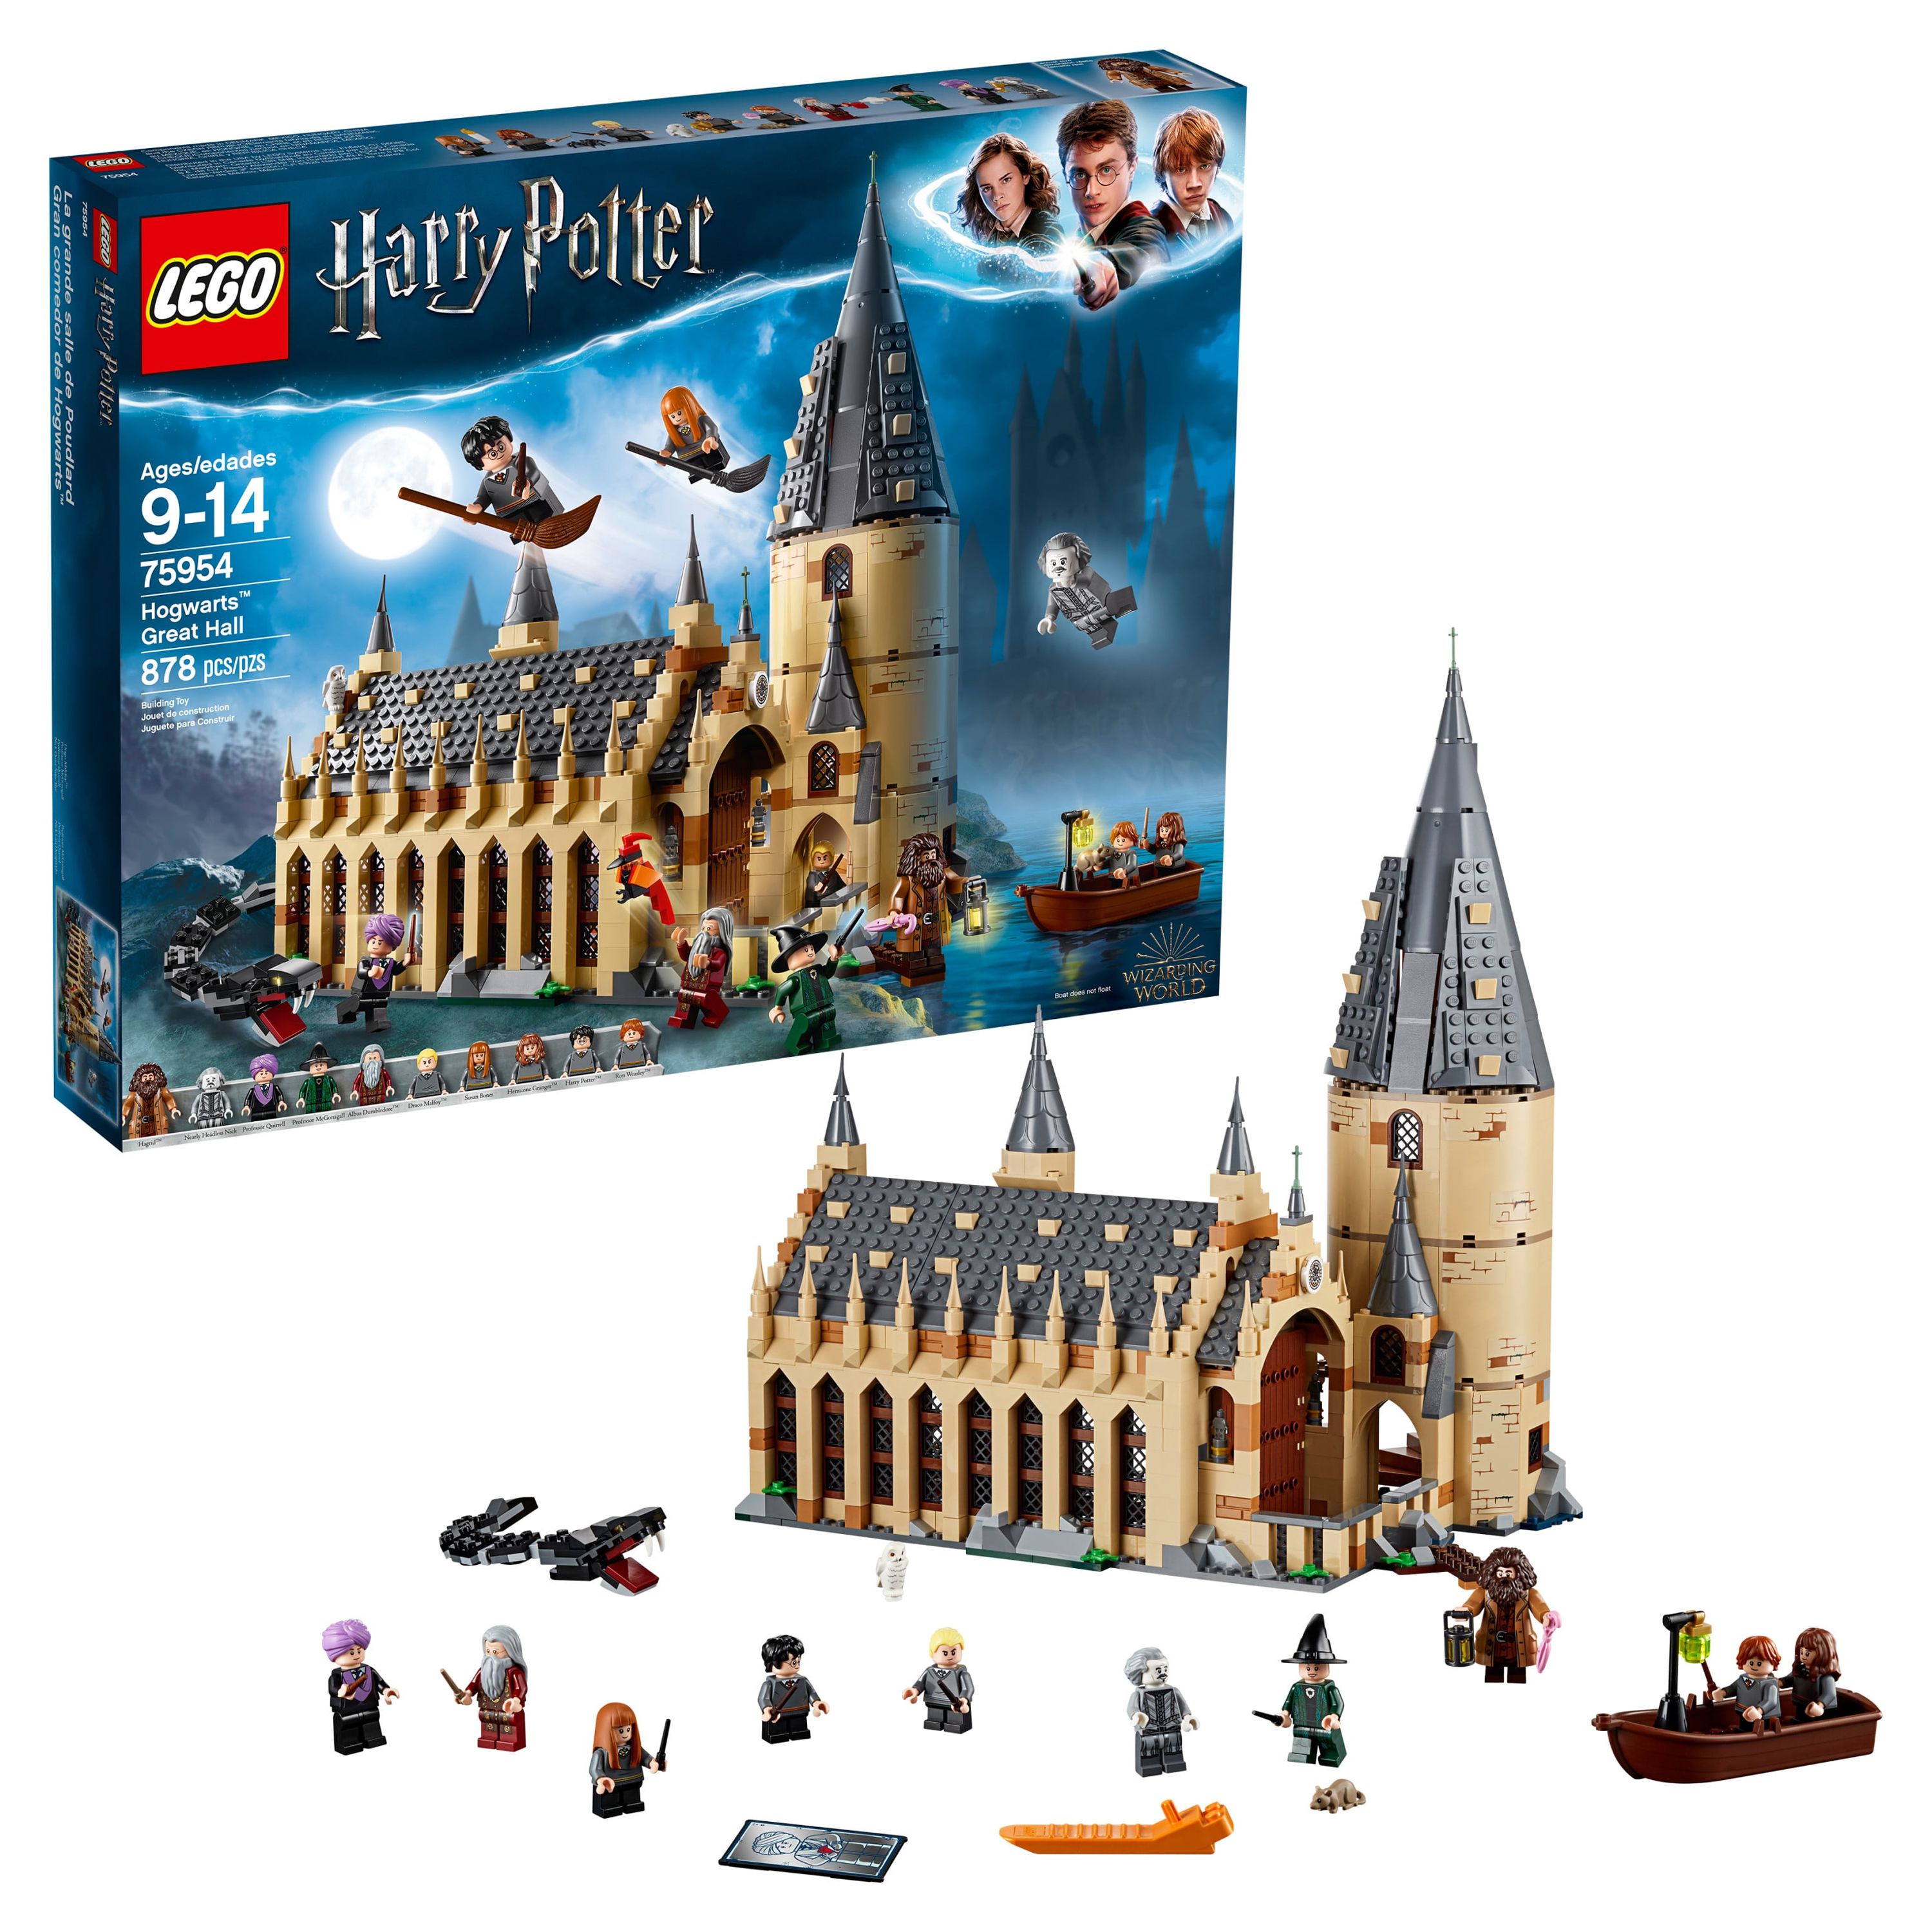 LEGO Harry Potter Hogwarts Great Hall 75954 Toy of the Year 2019 - image 1 of 5